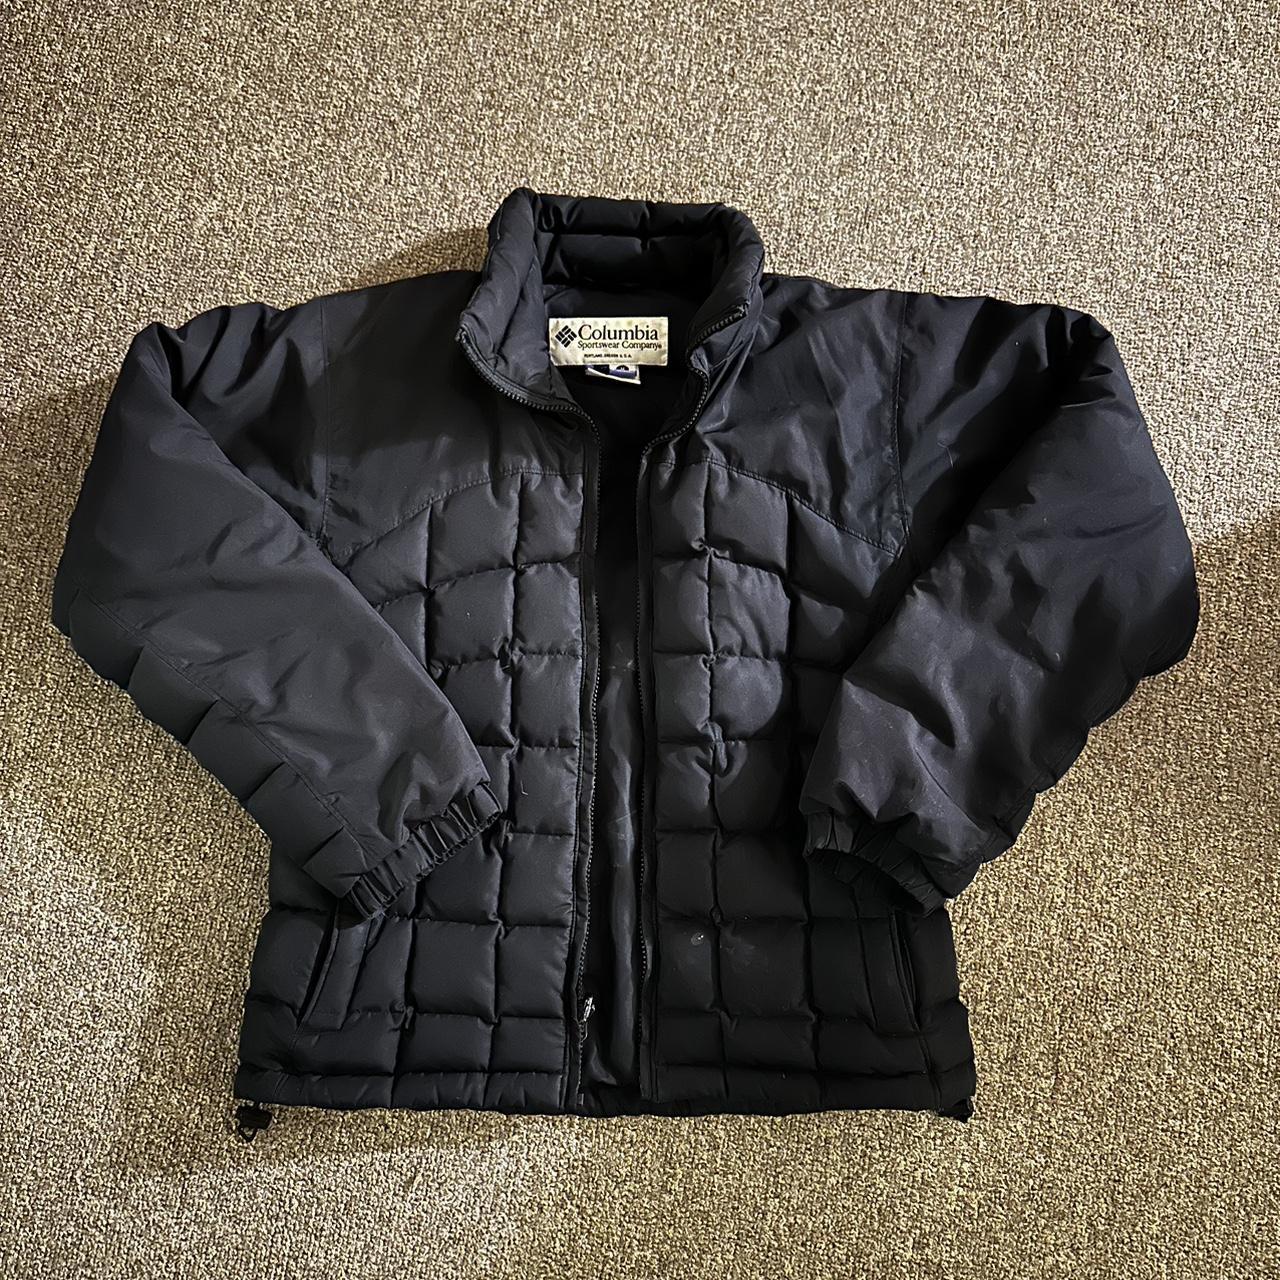 Columbia black puffer coat - flaws pictured - Depop